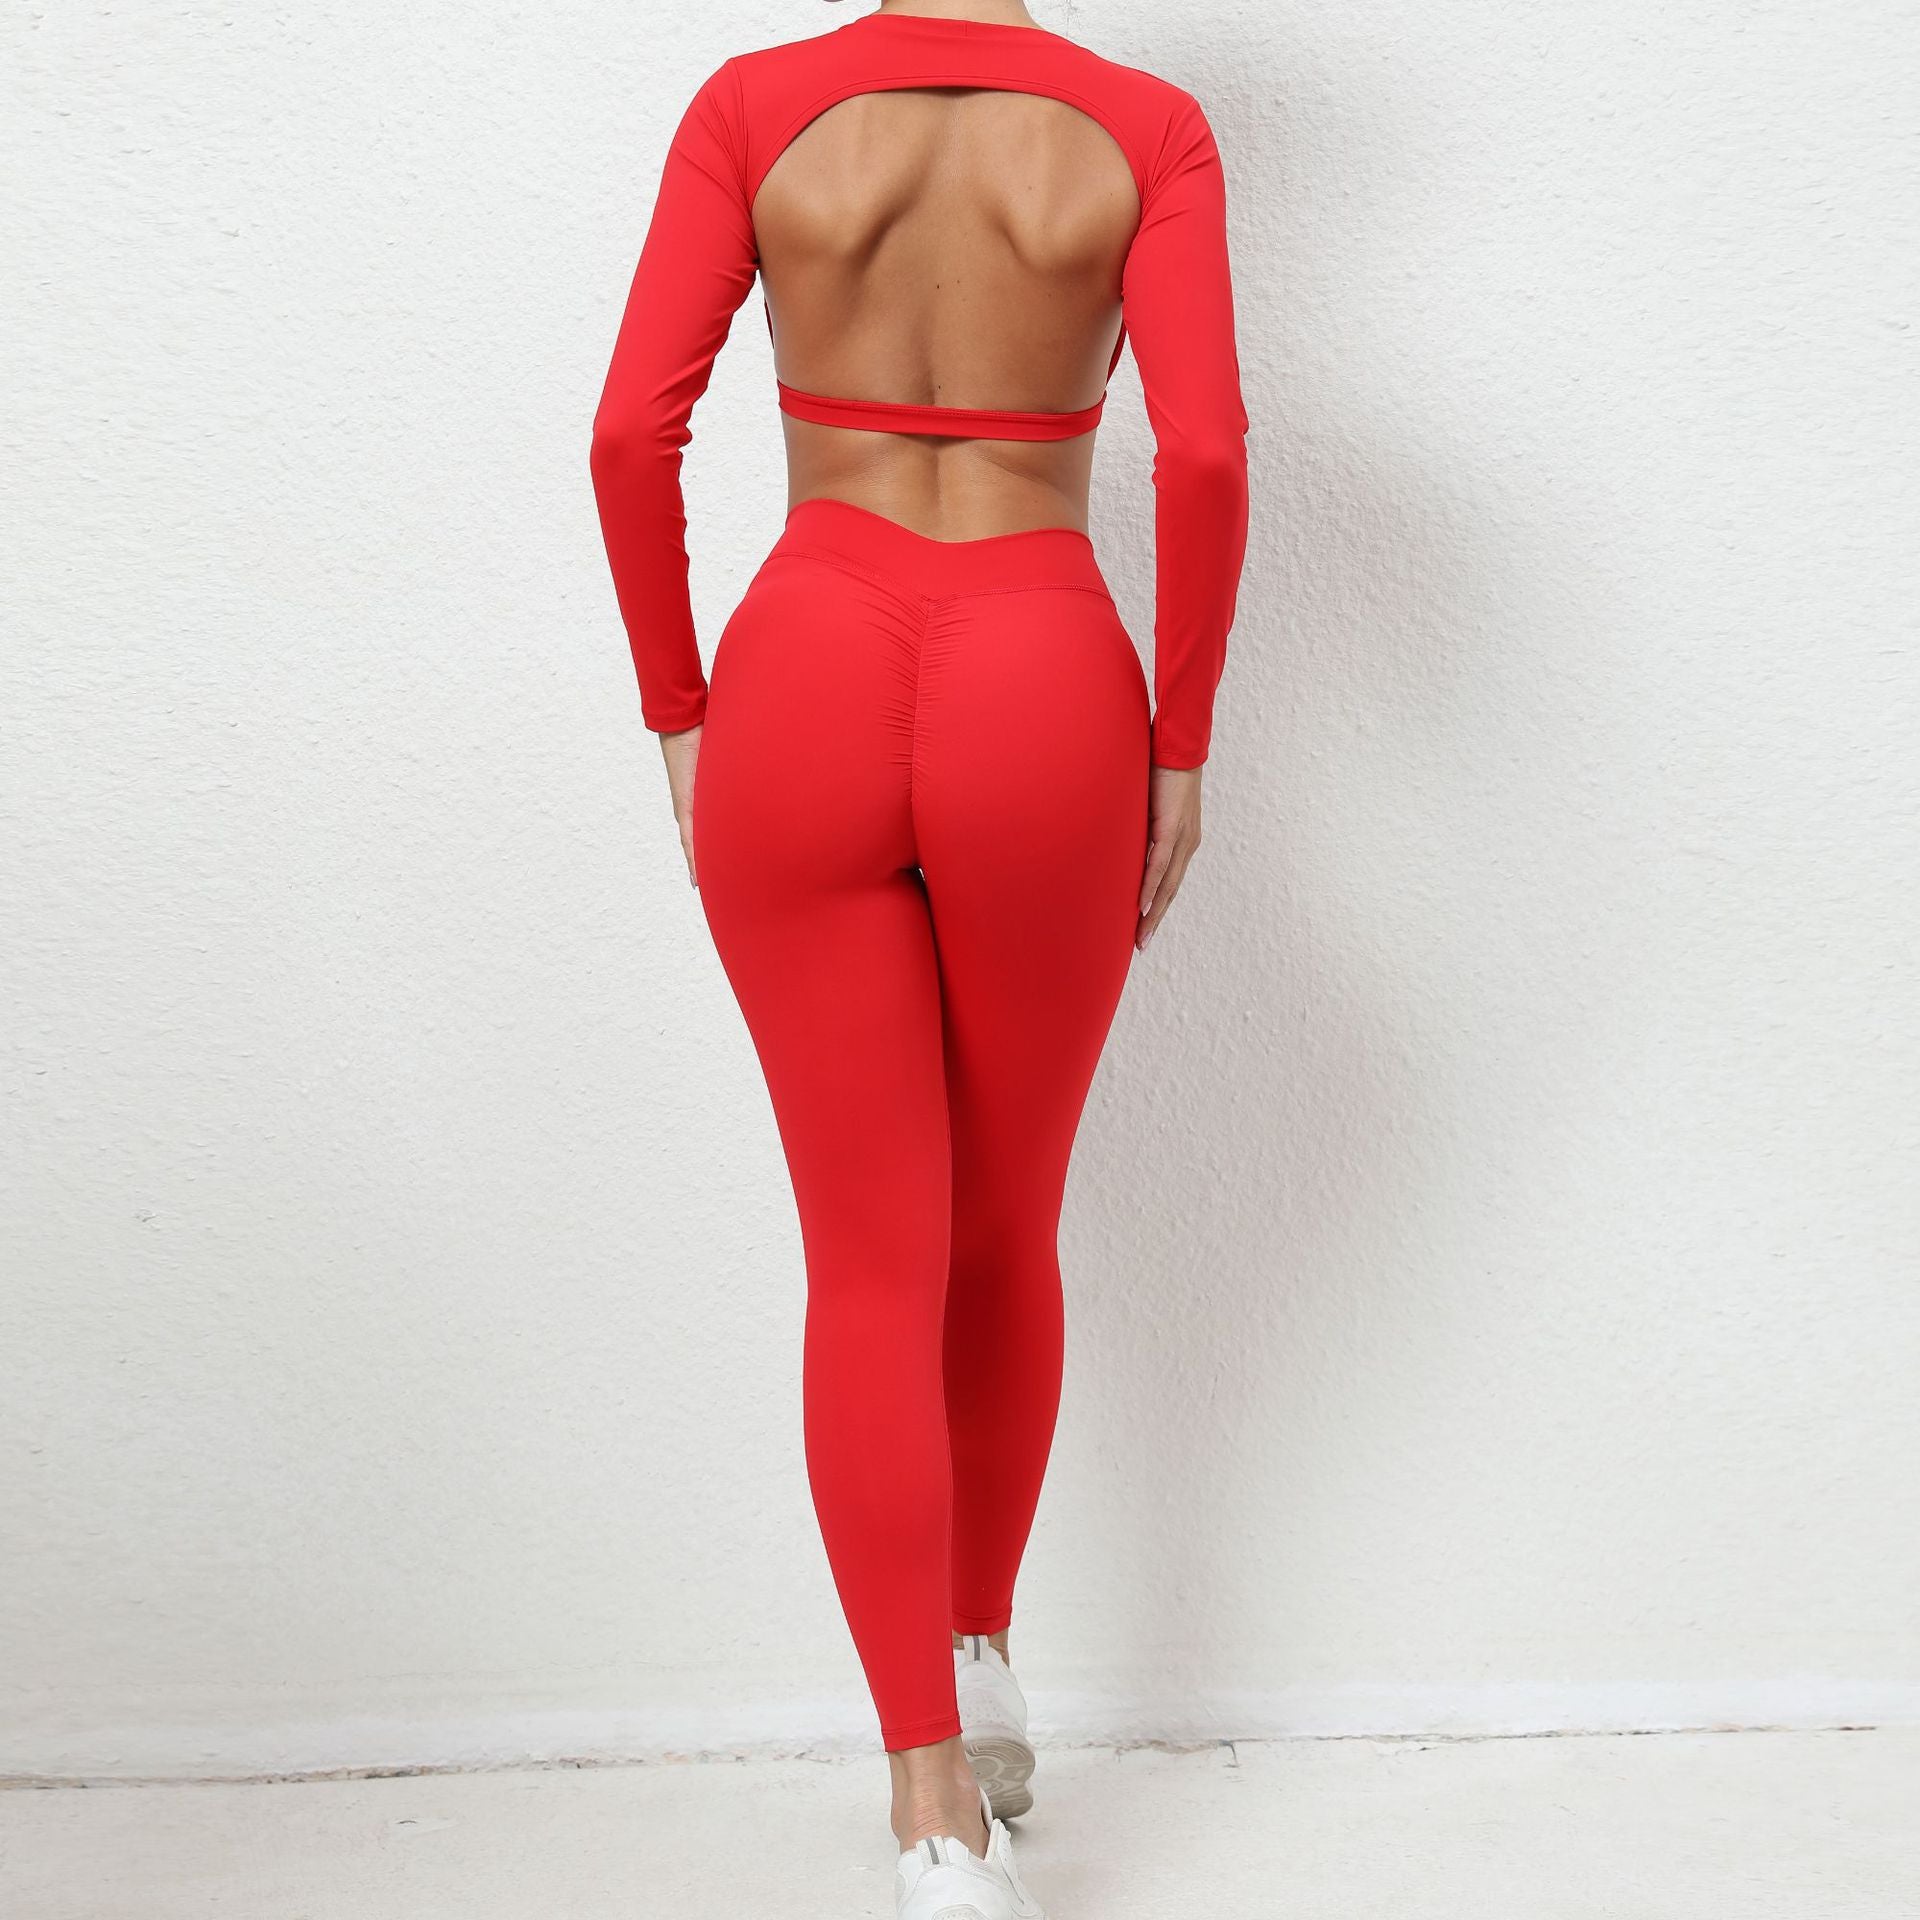 Big backless long-sleeved skintight quick-drying gym suit 5colors